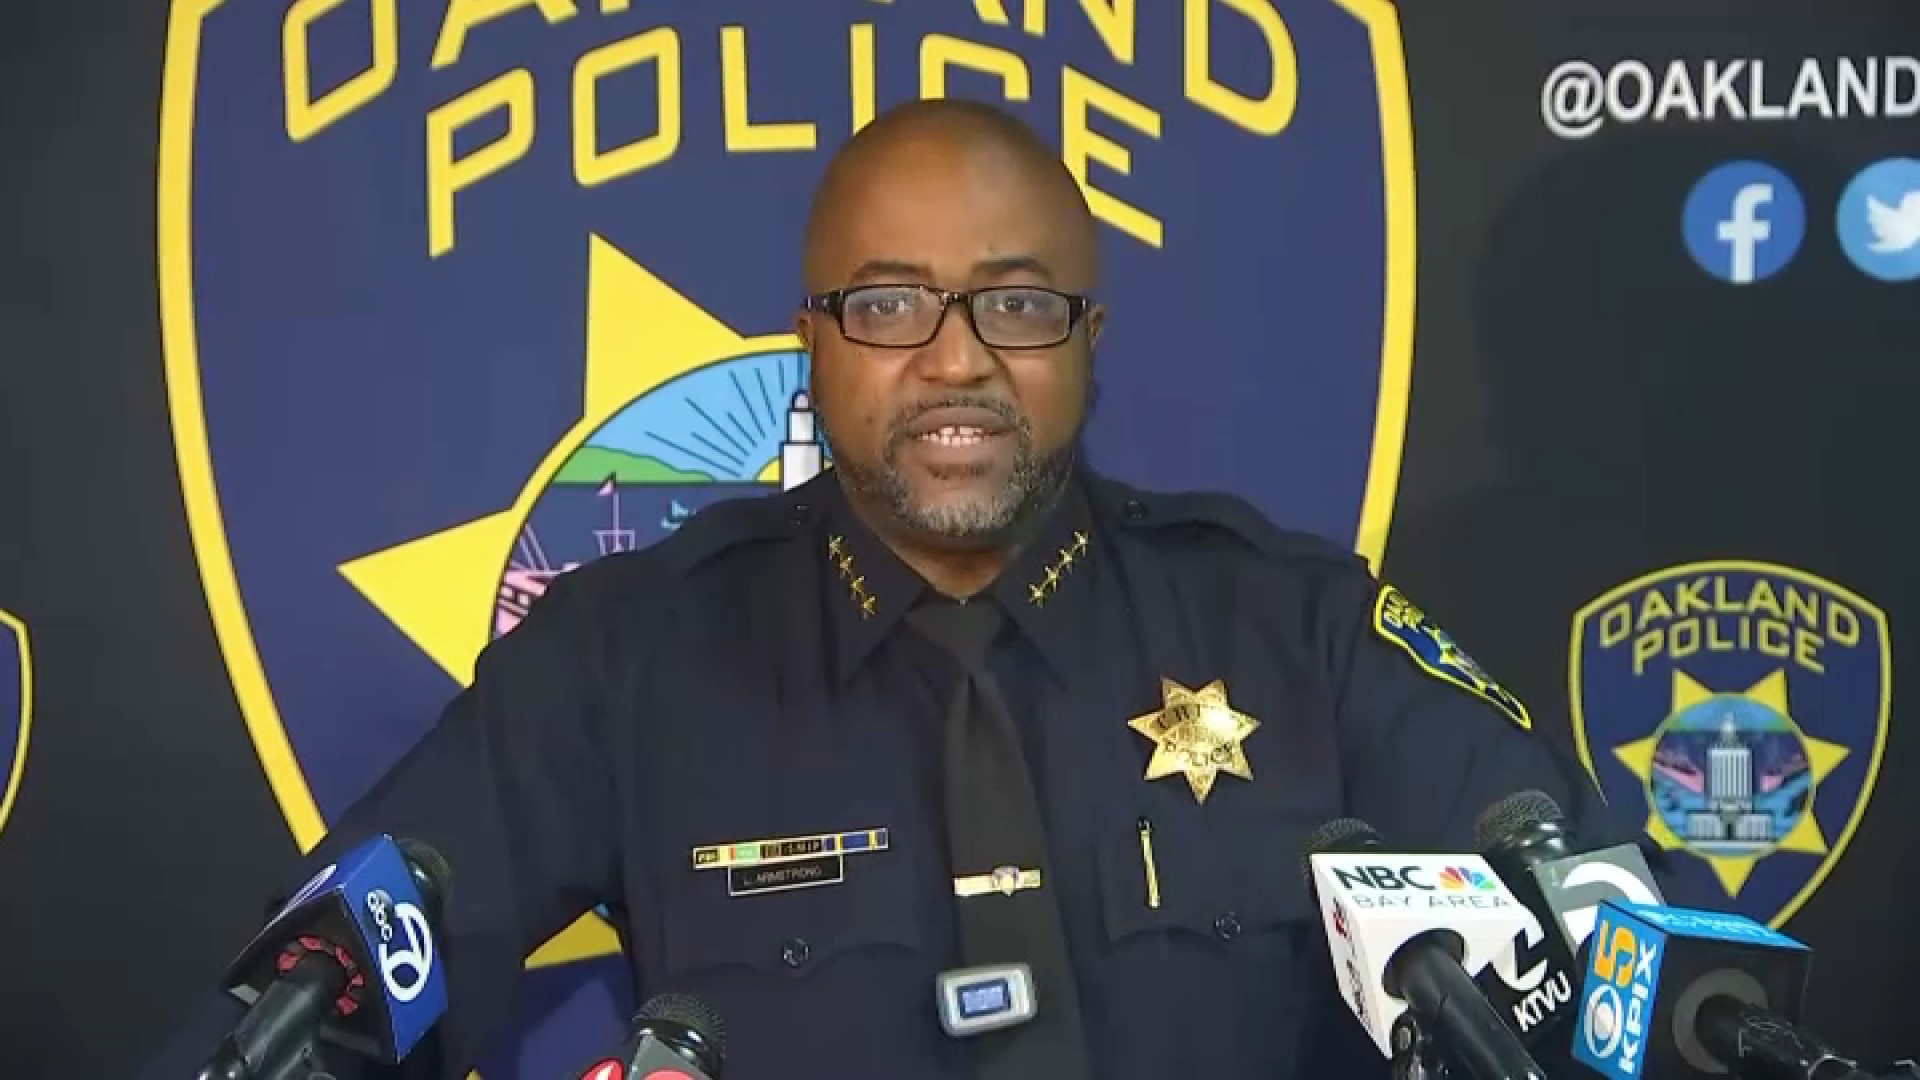 Oakland Police Chief Placed On Leave After Alleged Officer Misconduct Dallas Press News